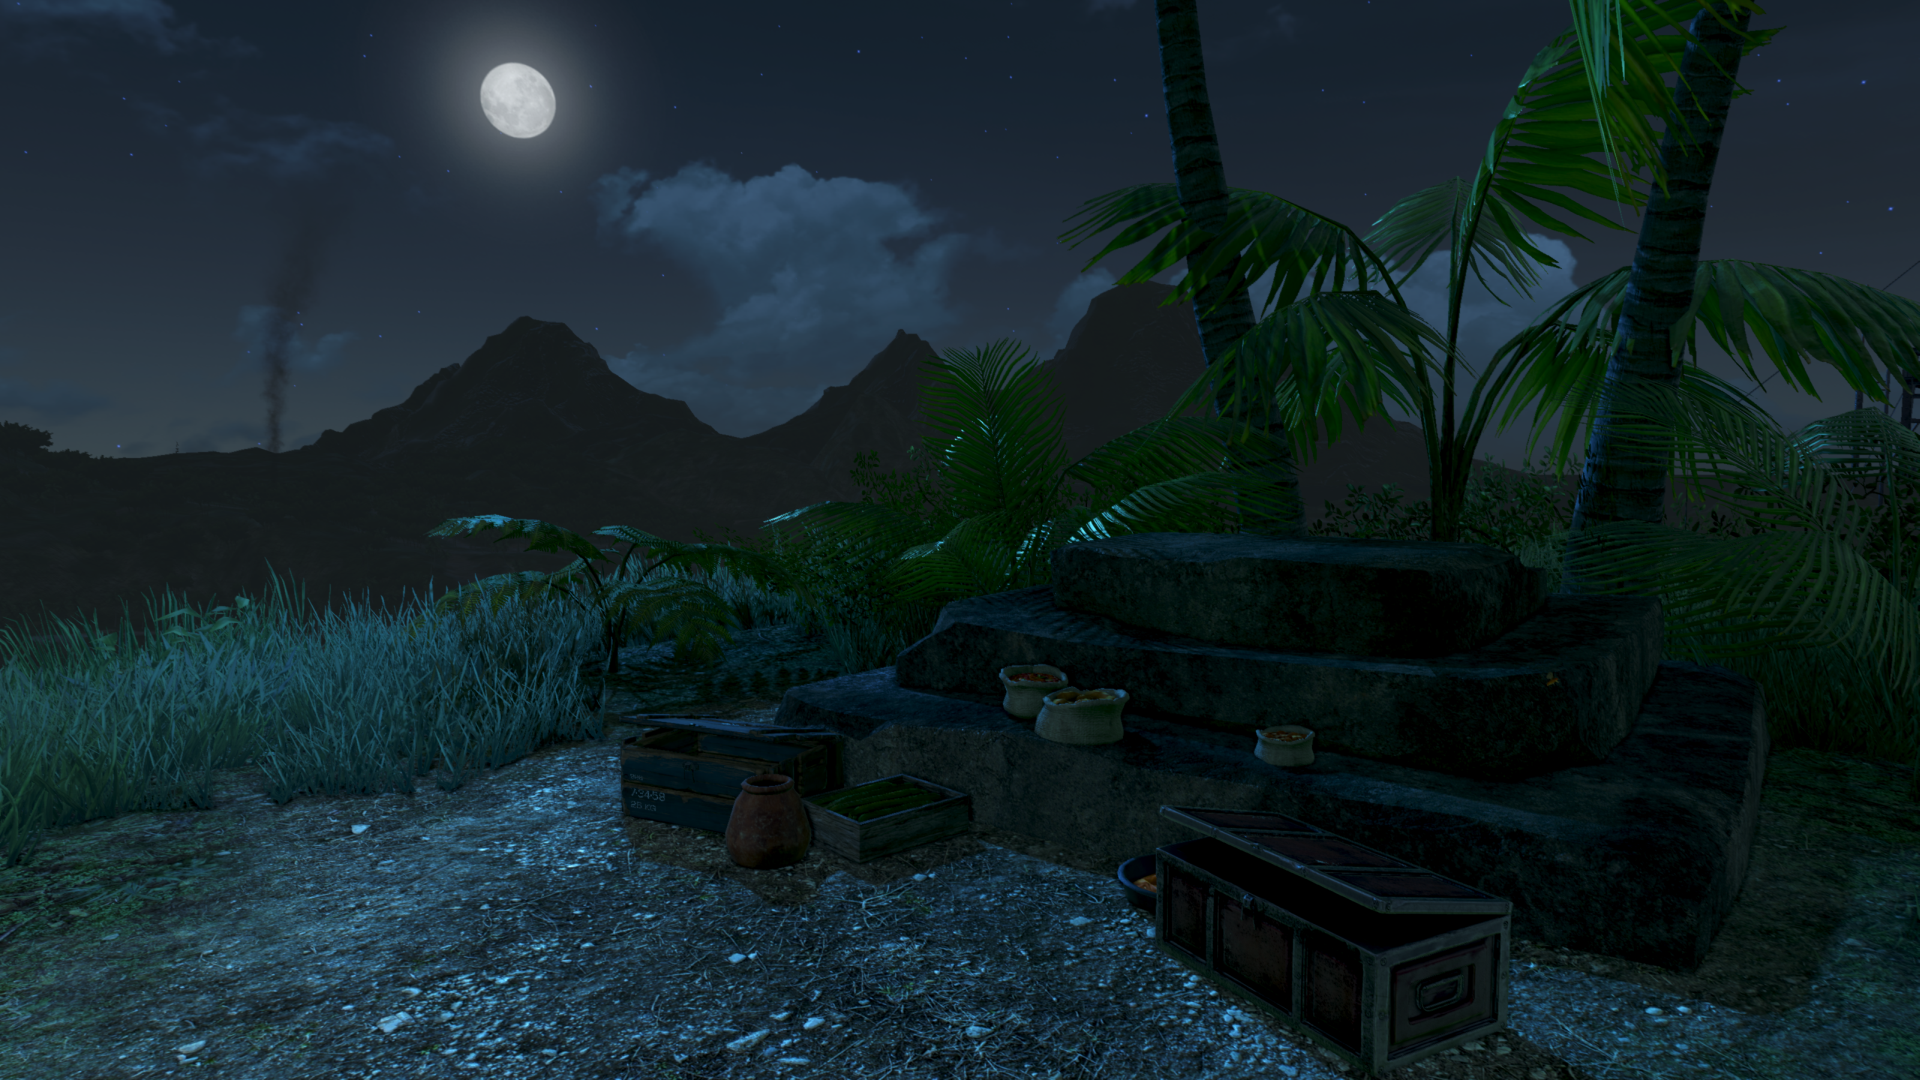 farcry3_2013_01_04_01sdj08.png